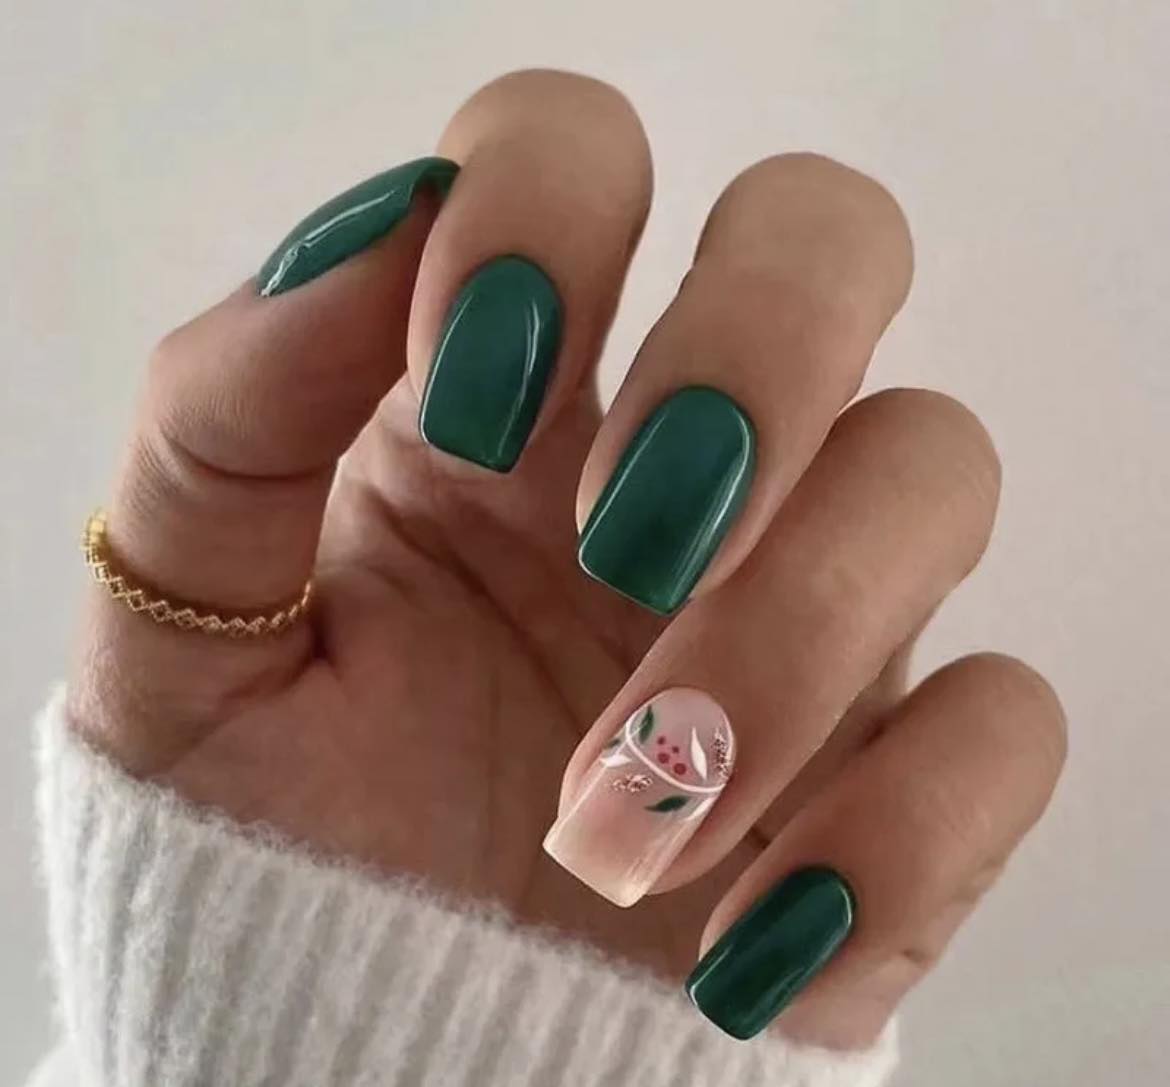 Squoval Press on Nails. Dark Green & Pale Pink with Leaves. Durable Acrylic Press on Nails. Easy and quick to apply. Great for those special occasions, parties or add an edge to any outfit. Gorgeous, flattering and you can re-use them again and again.